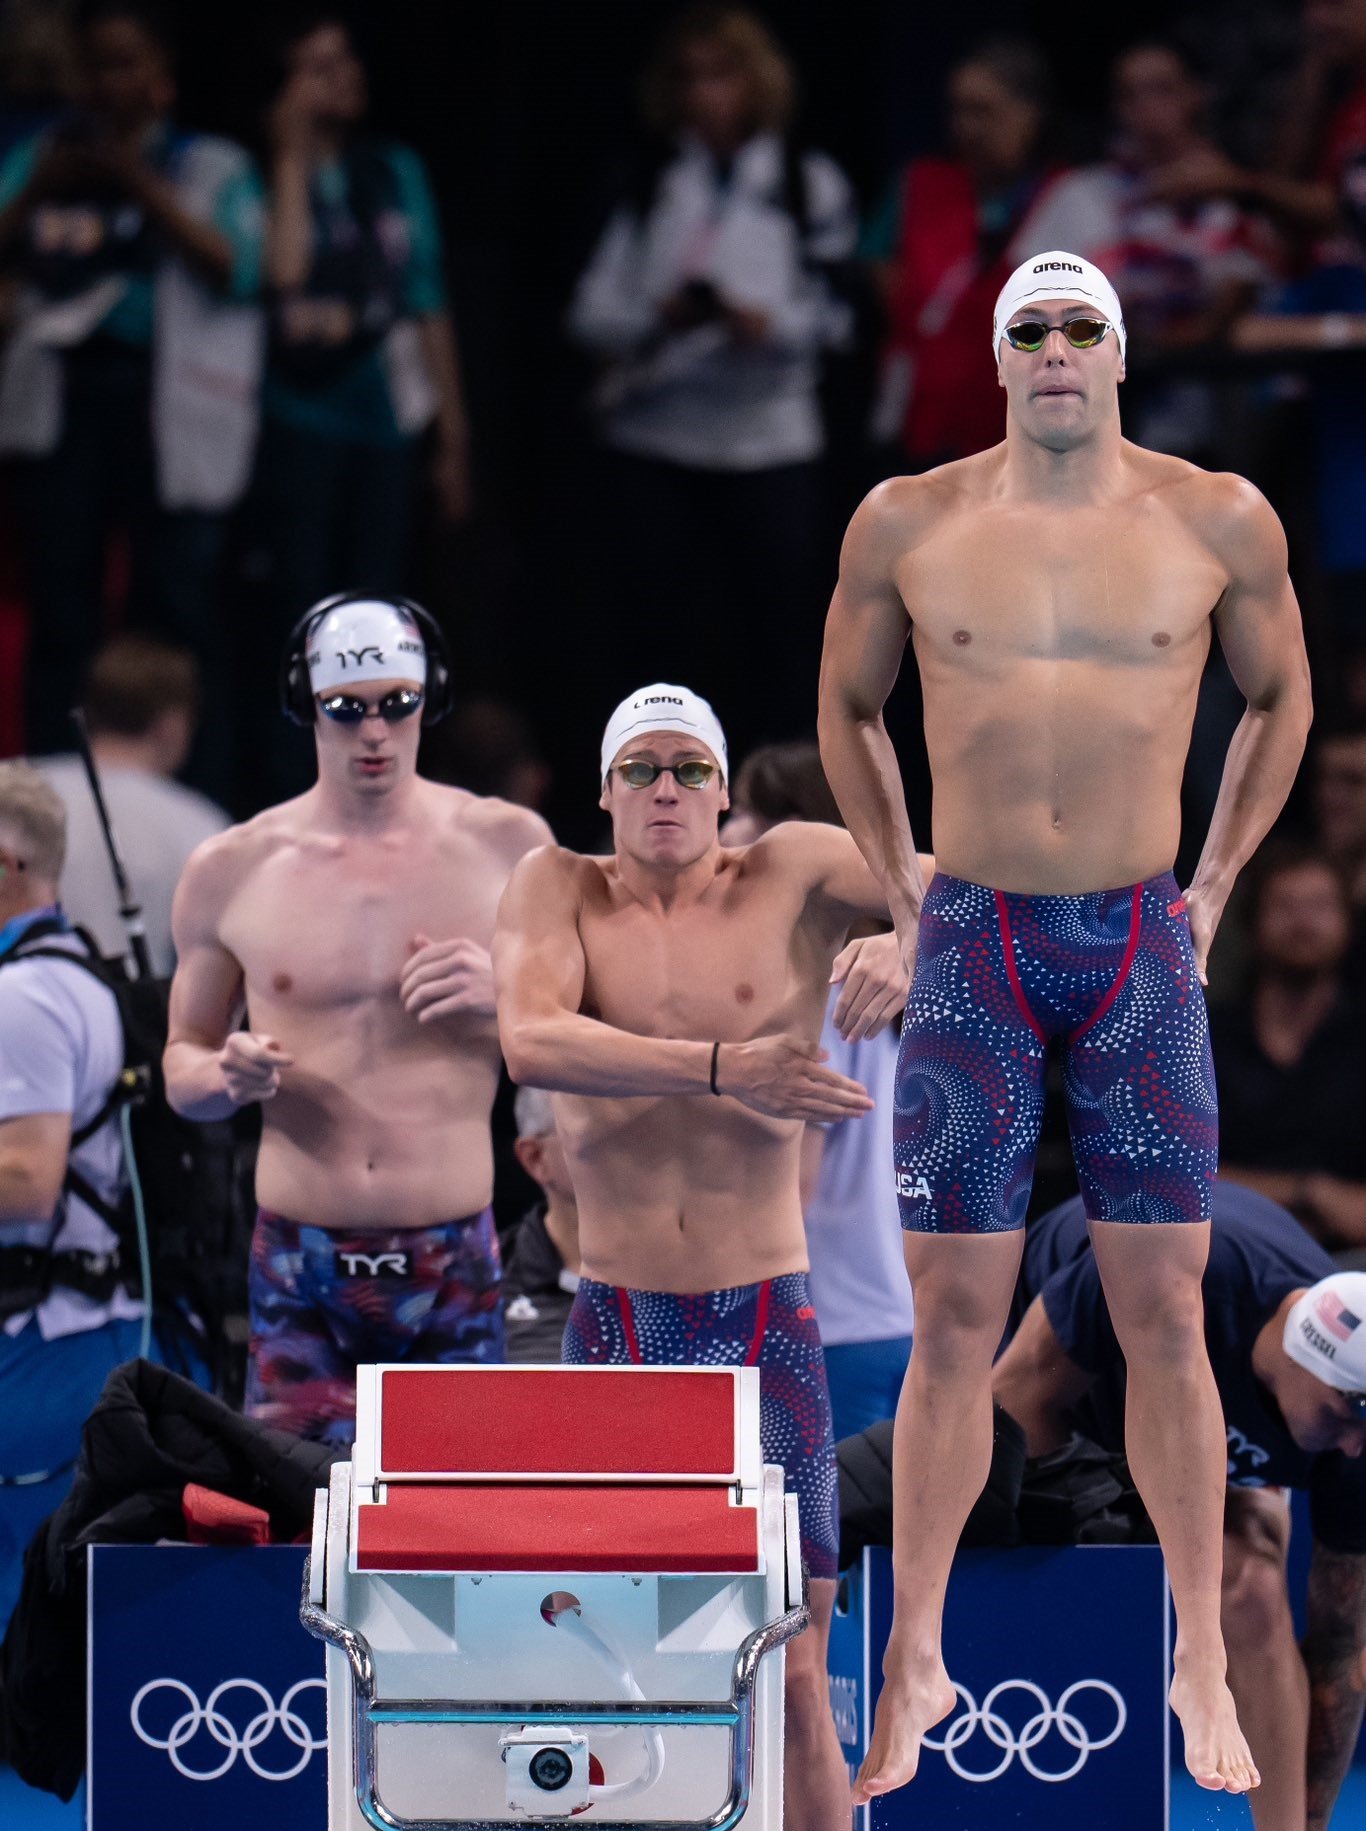 USA wins gold in men’s 4x100M freestyle relay final 4